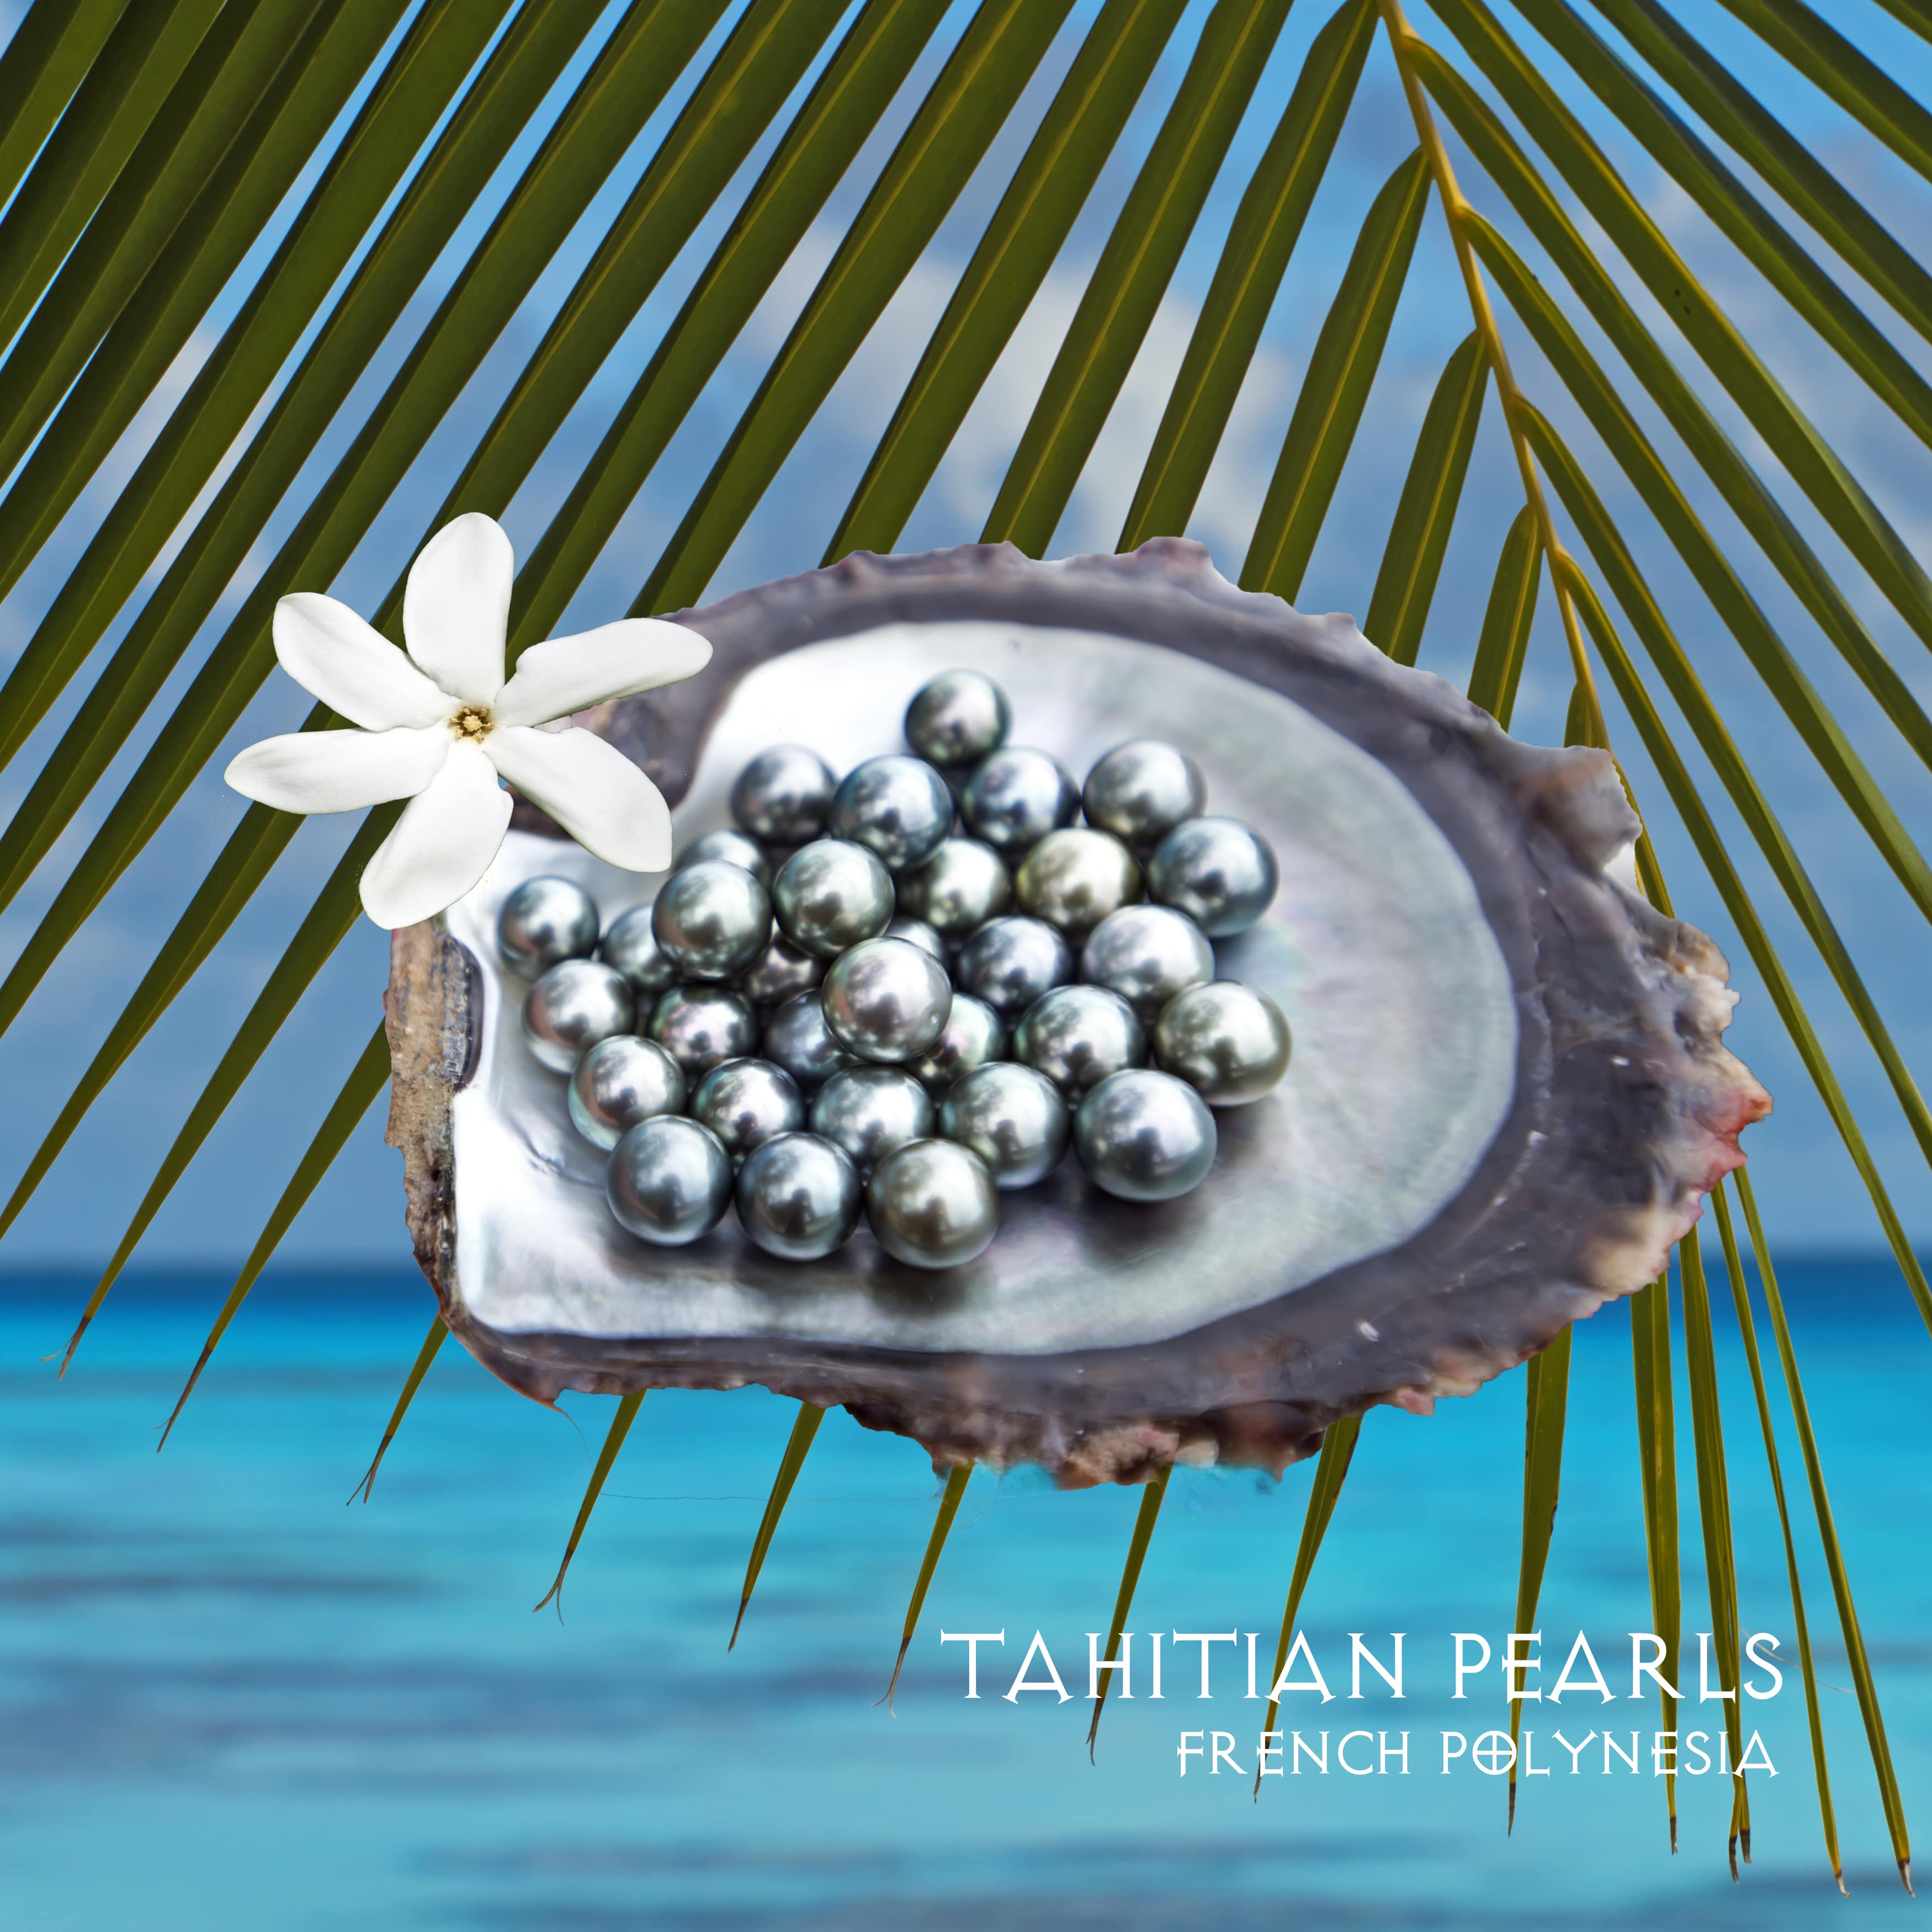 Image for Tahitian Pearls Category